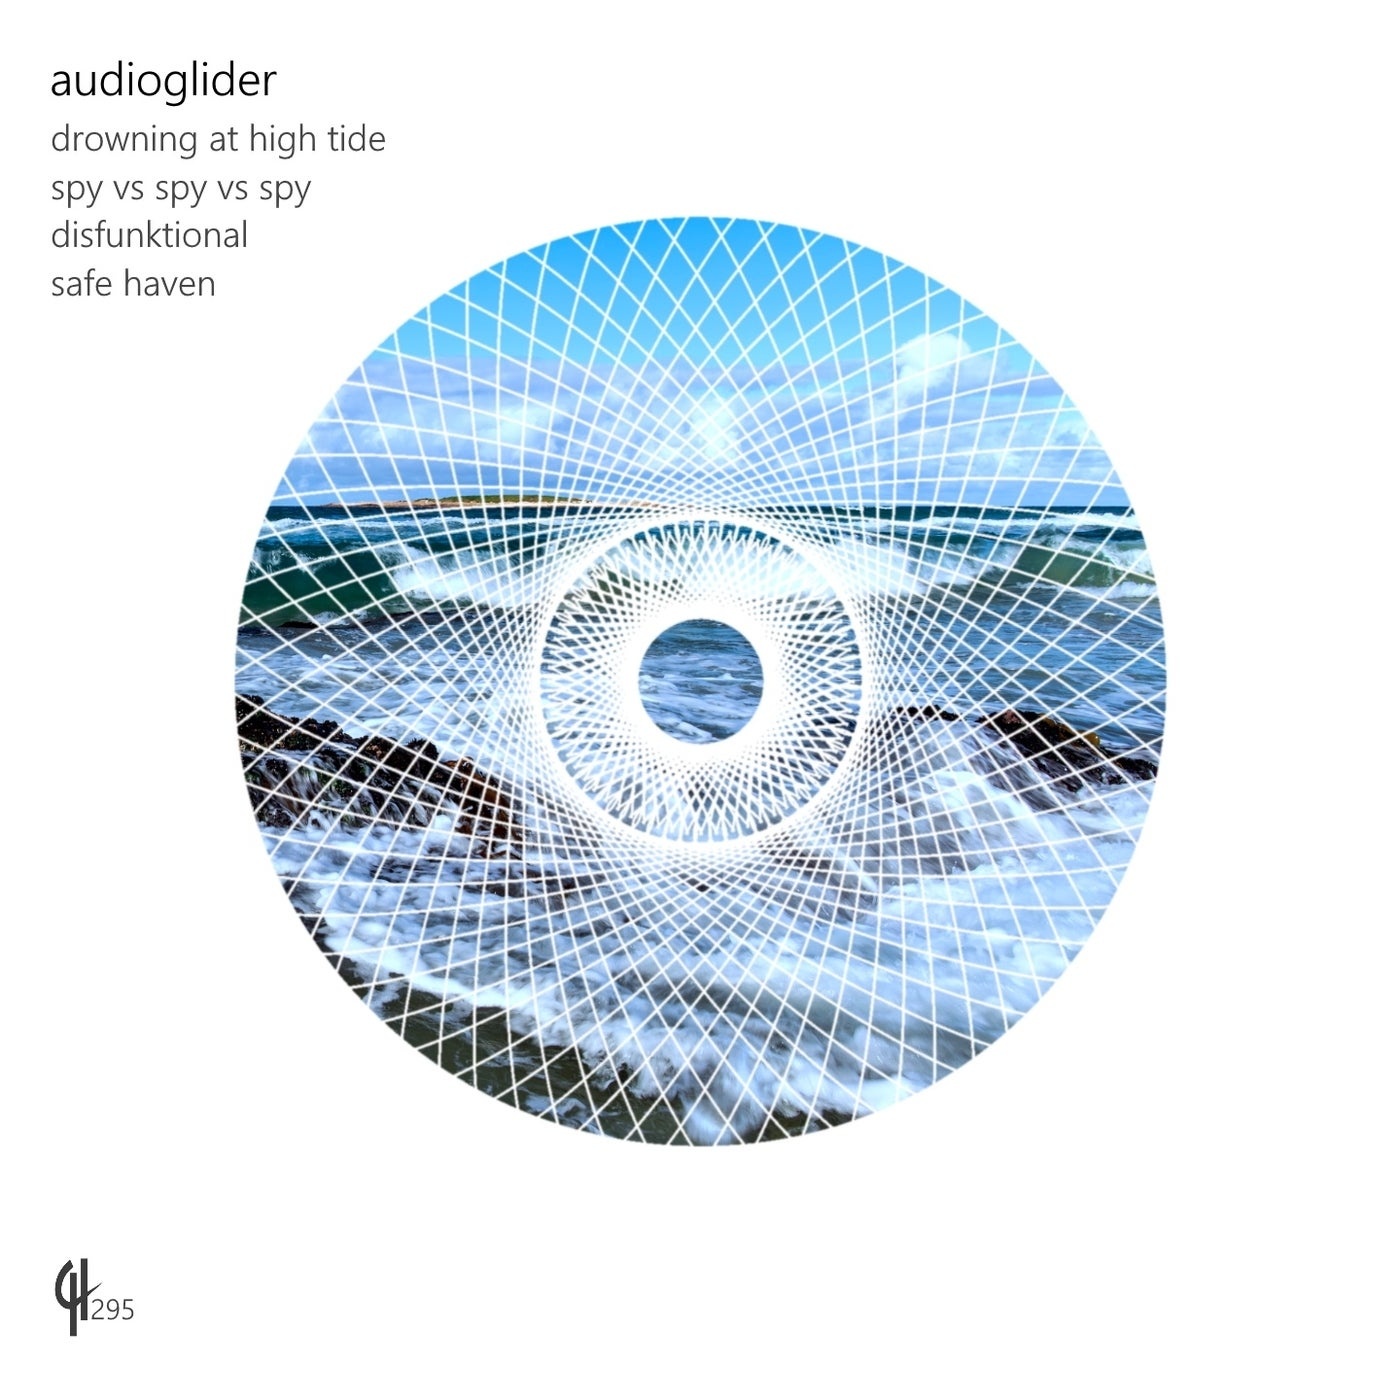 Audioglider - Drowning at High Tide [CH295]